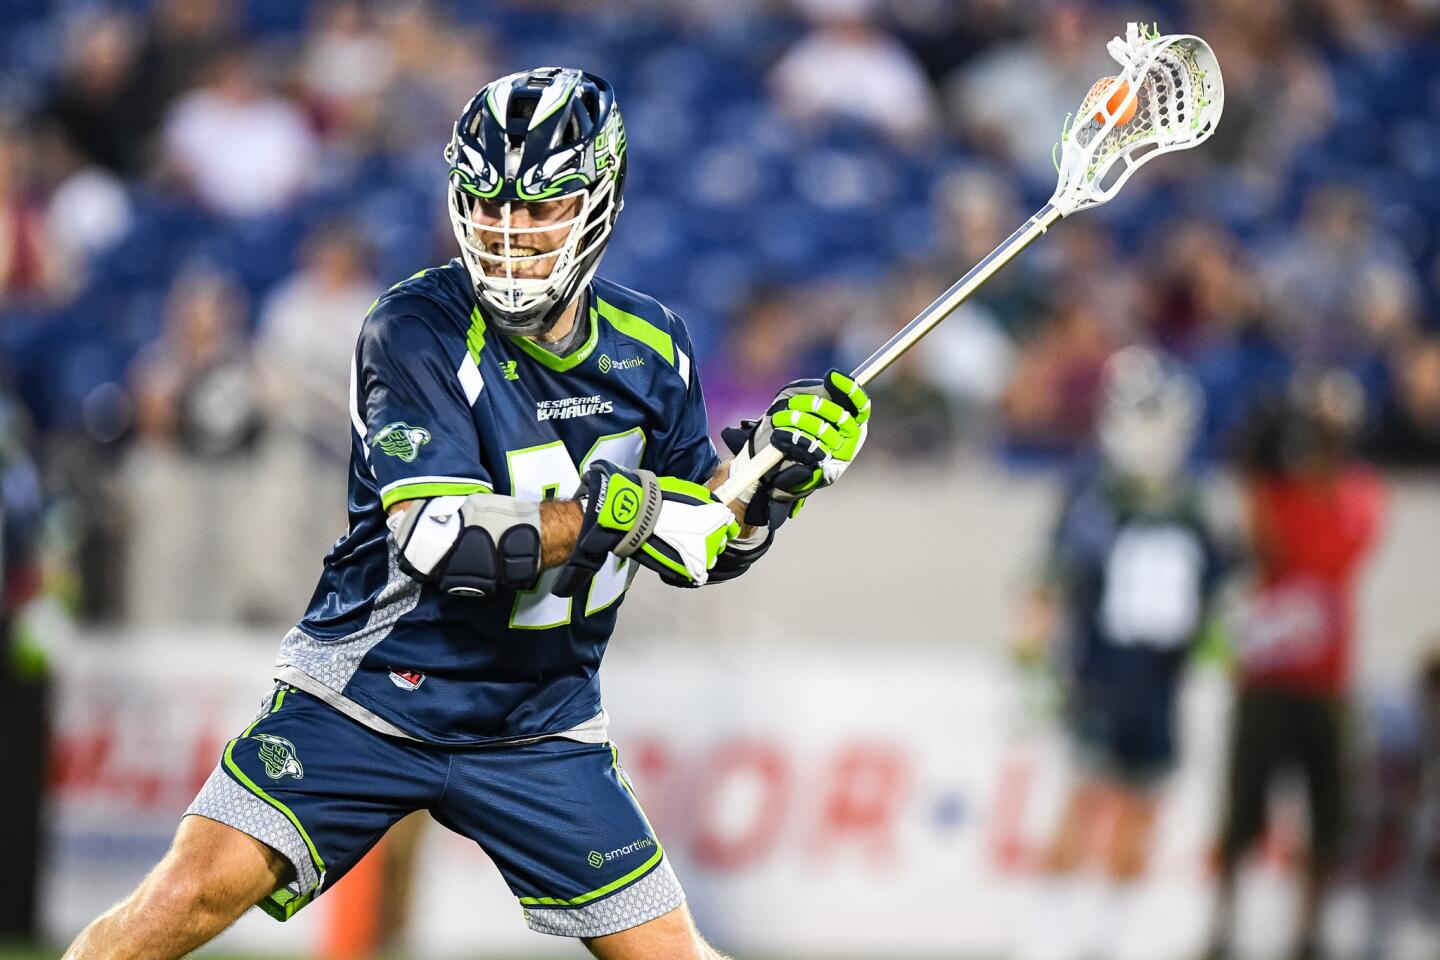 Chesapeake Bayhawks midfielder Kevin McNally (72) attempts shot during the first quarter against the New York Lizards at Navy-Marine Corps Memorial Stadium.